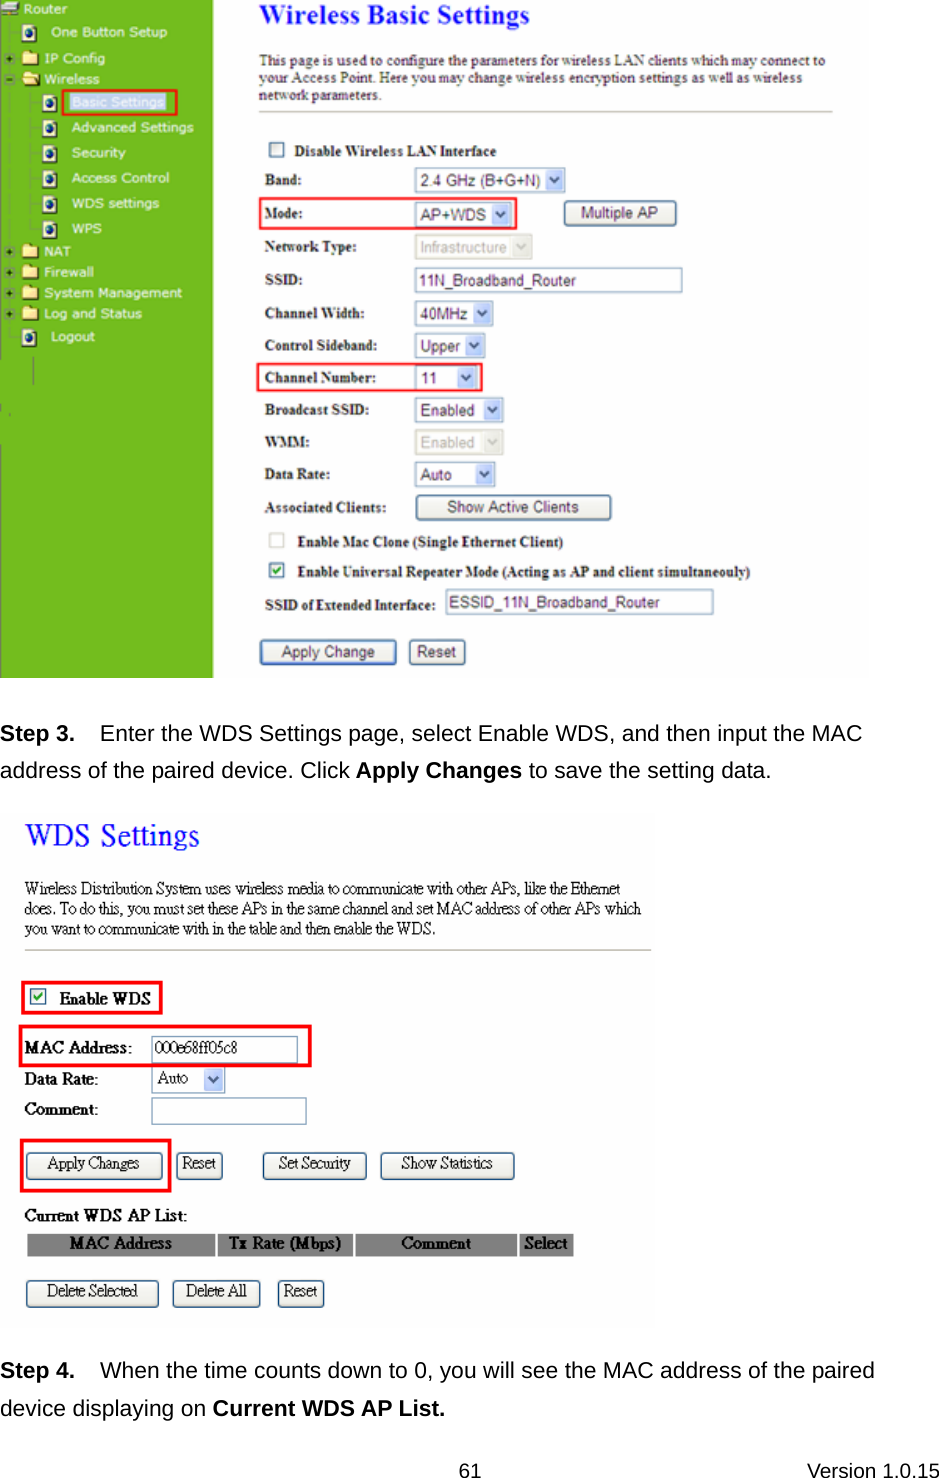 Version 1.0.15 61 Step 3.  Enter the WDS Settings page, select Enable WDS, and then input the MAC address of the paired device. Click Apply Changes to save the setting data.  Step 4.  When the time counts down to 0, you will see the MAC address of the paired device displaying on Current WDS AP List. 